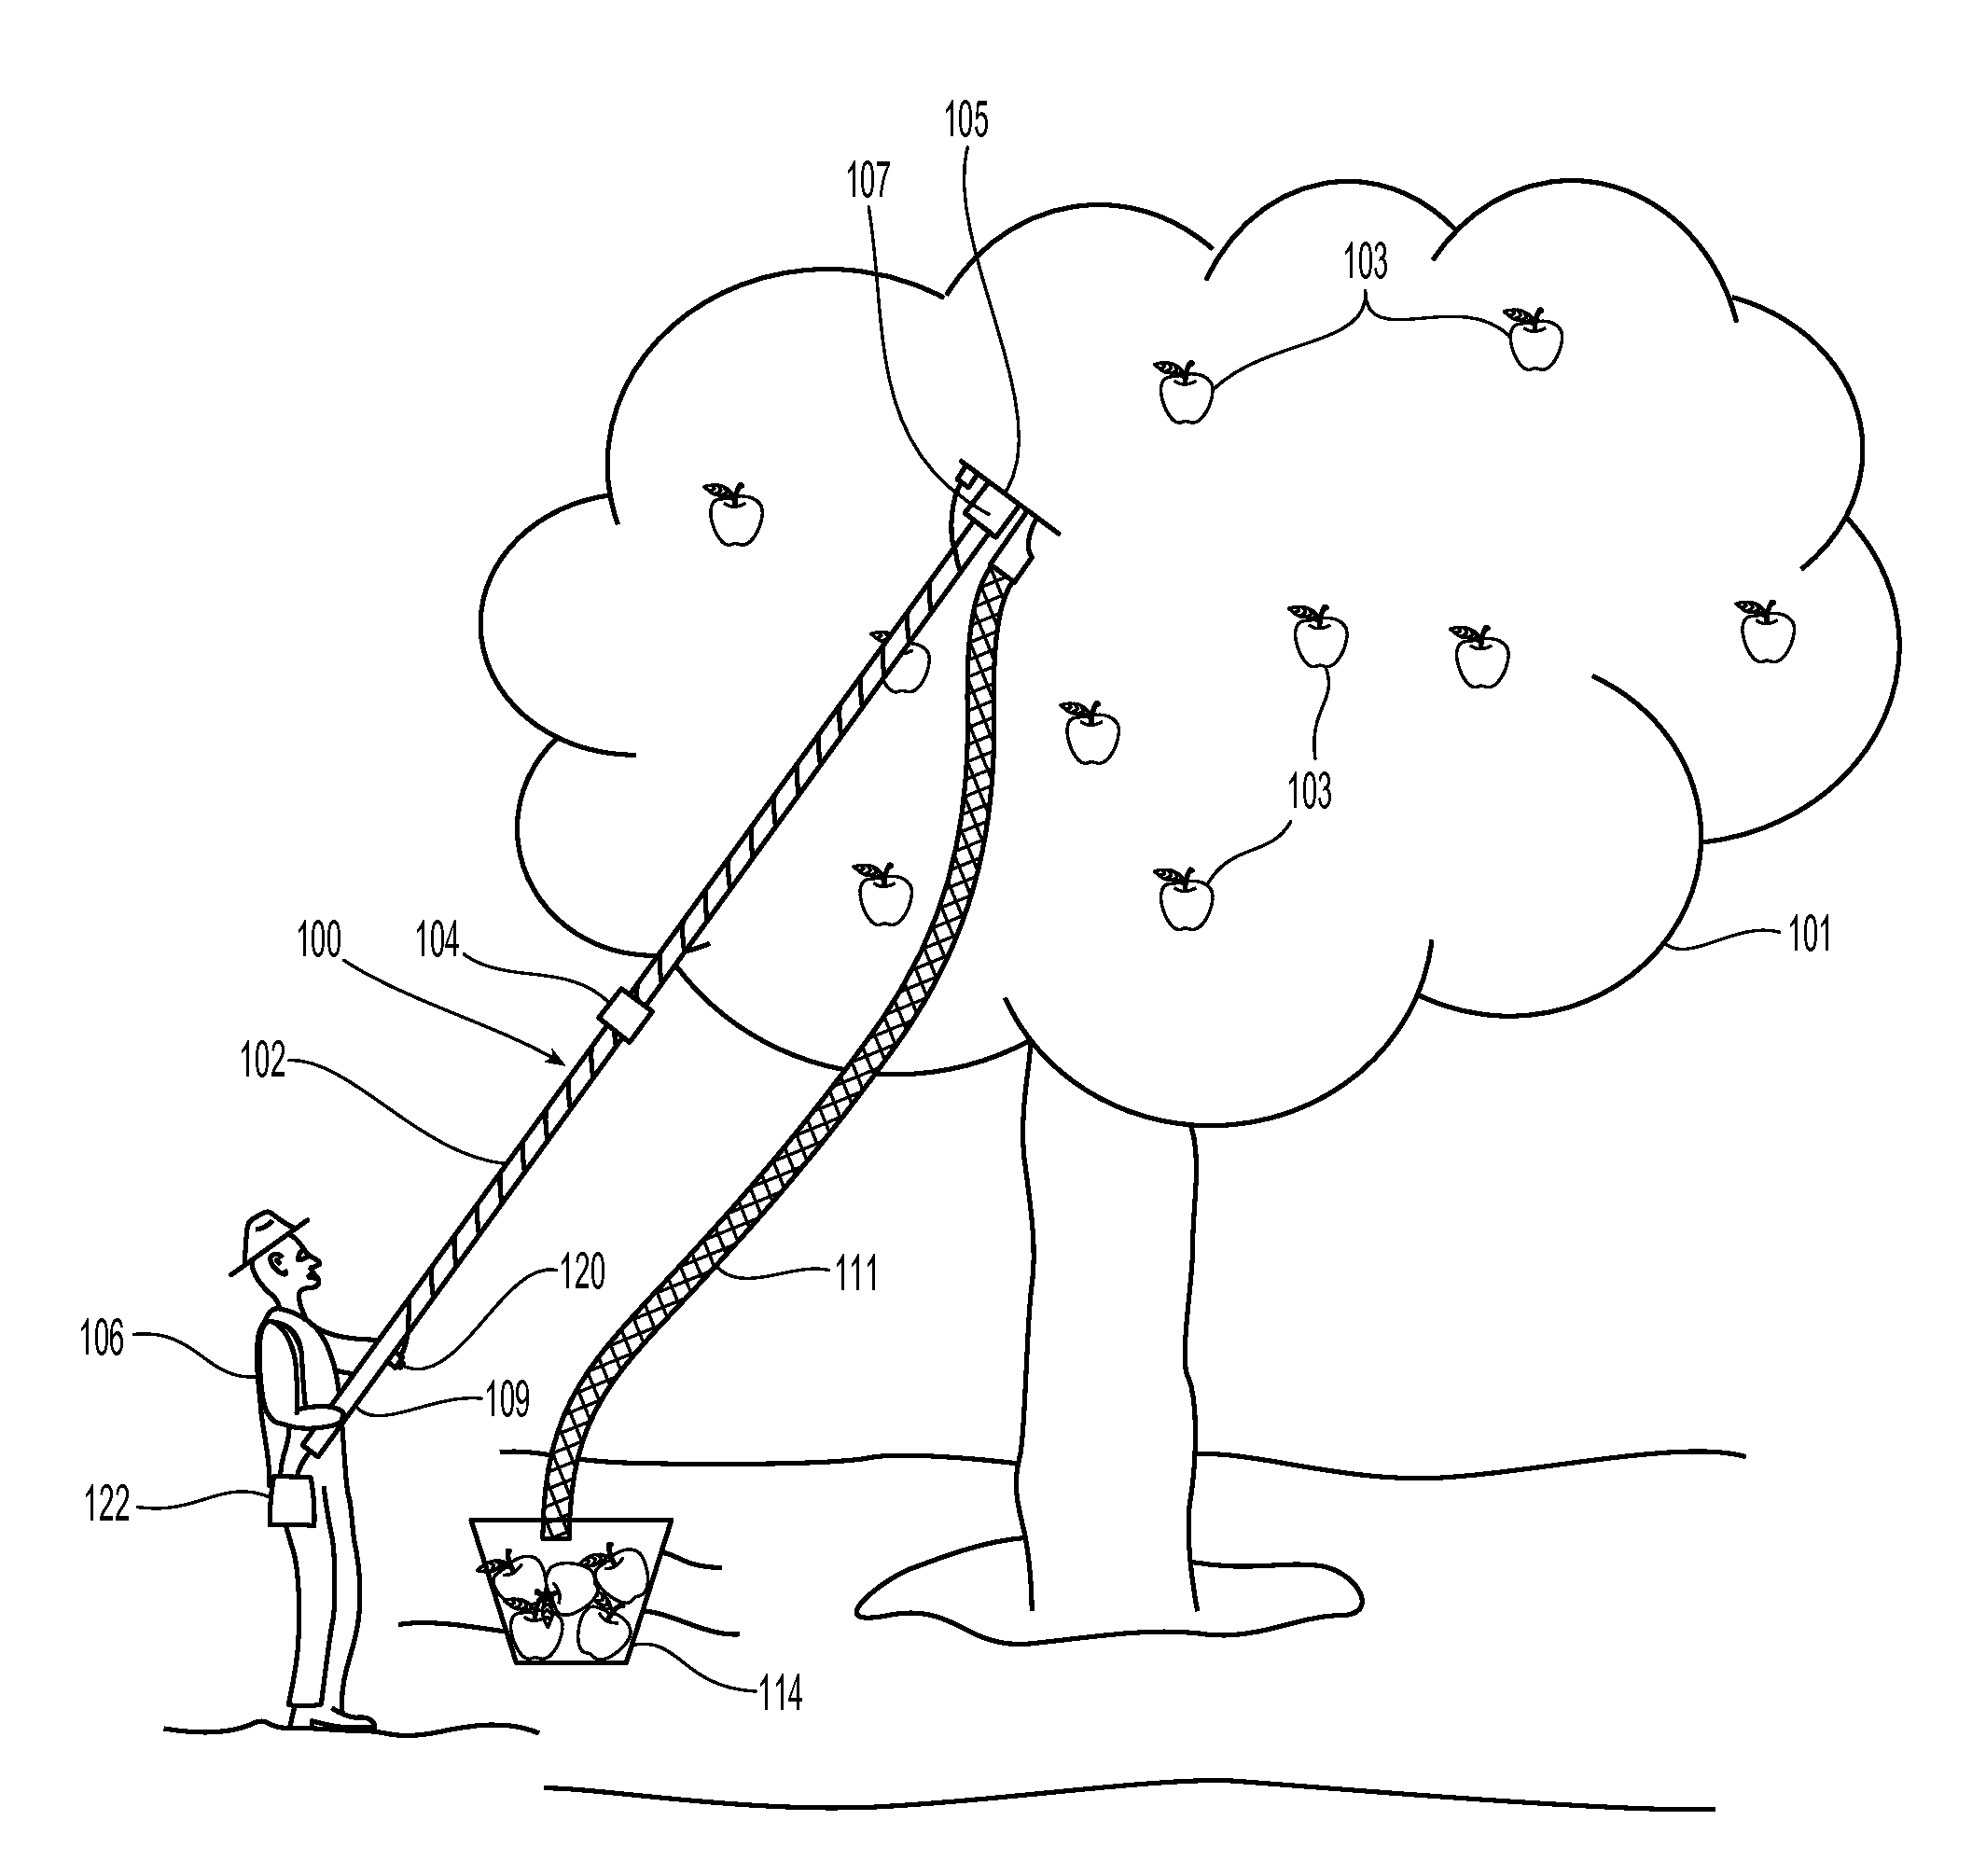 Apple and Fruit Harvester